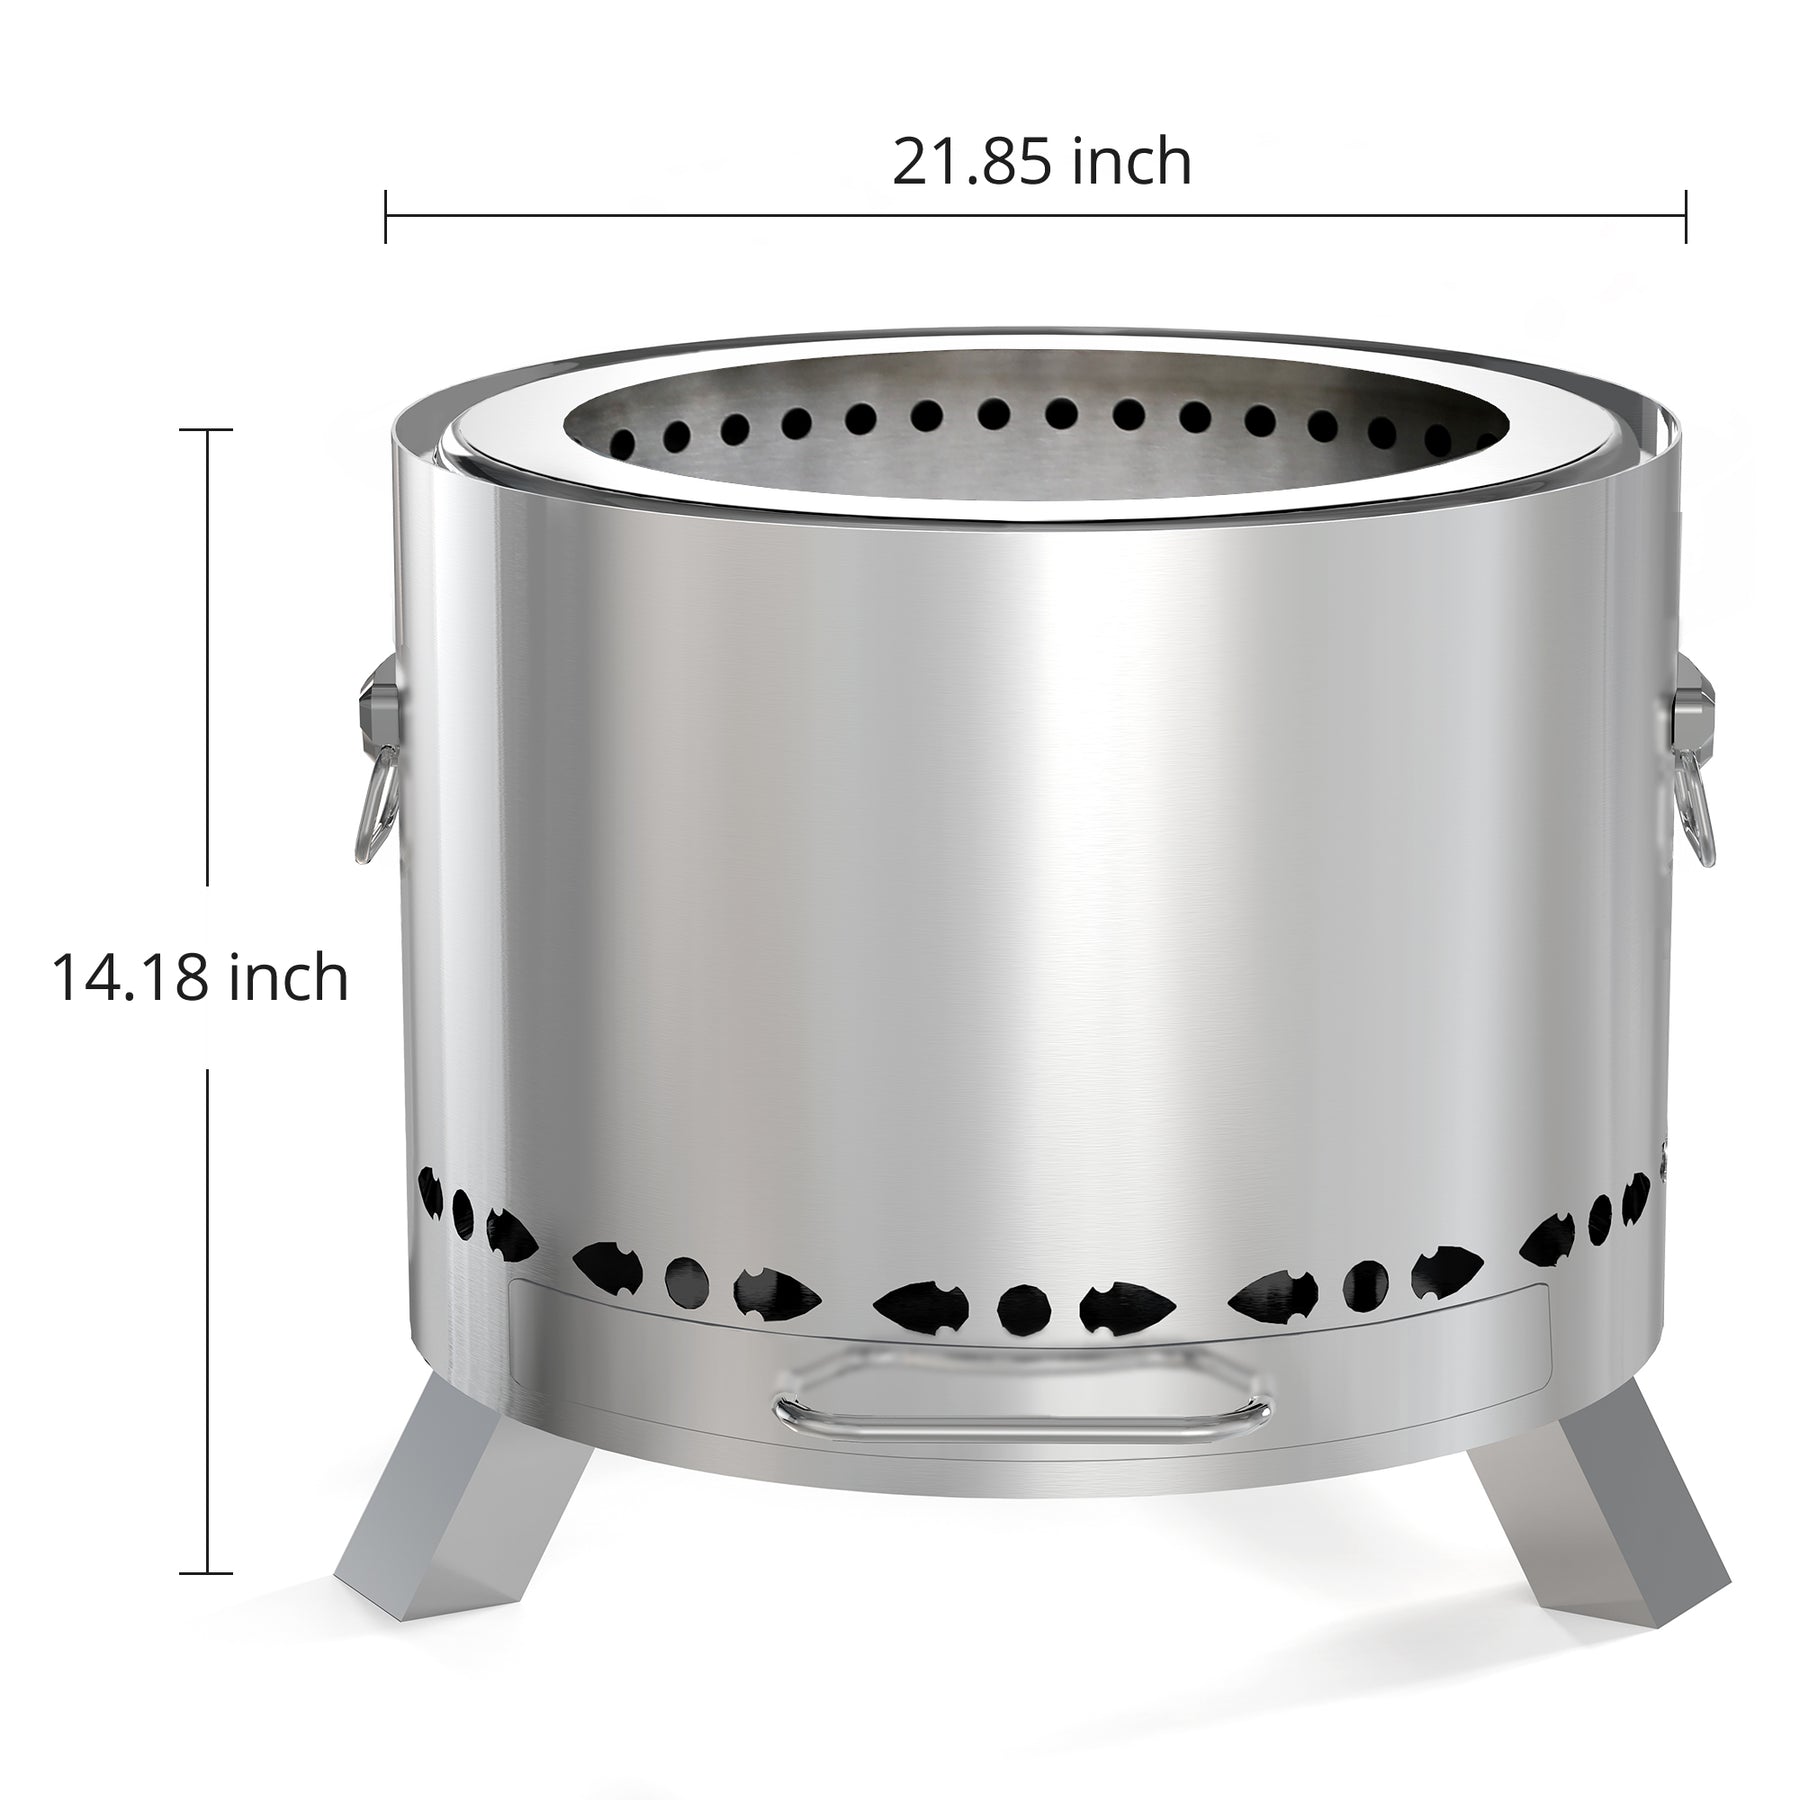 SWIPESMITH Smokeless Stove Bonfire, Portable Stainless Steel Fire Pit Ideal for Indoor and Outdoor Camping